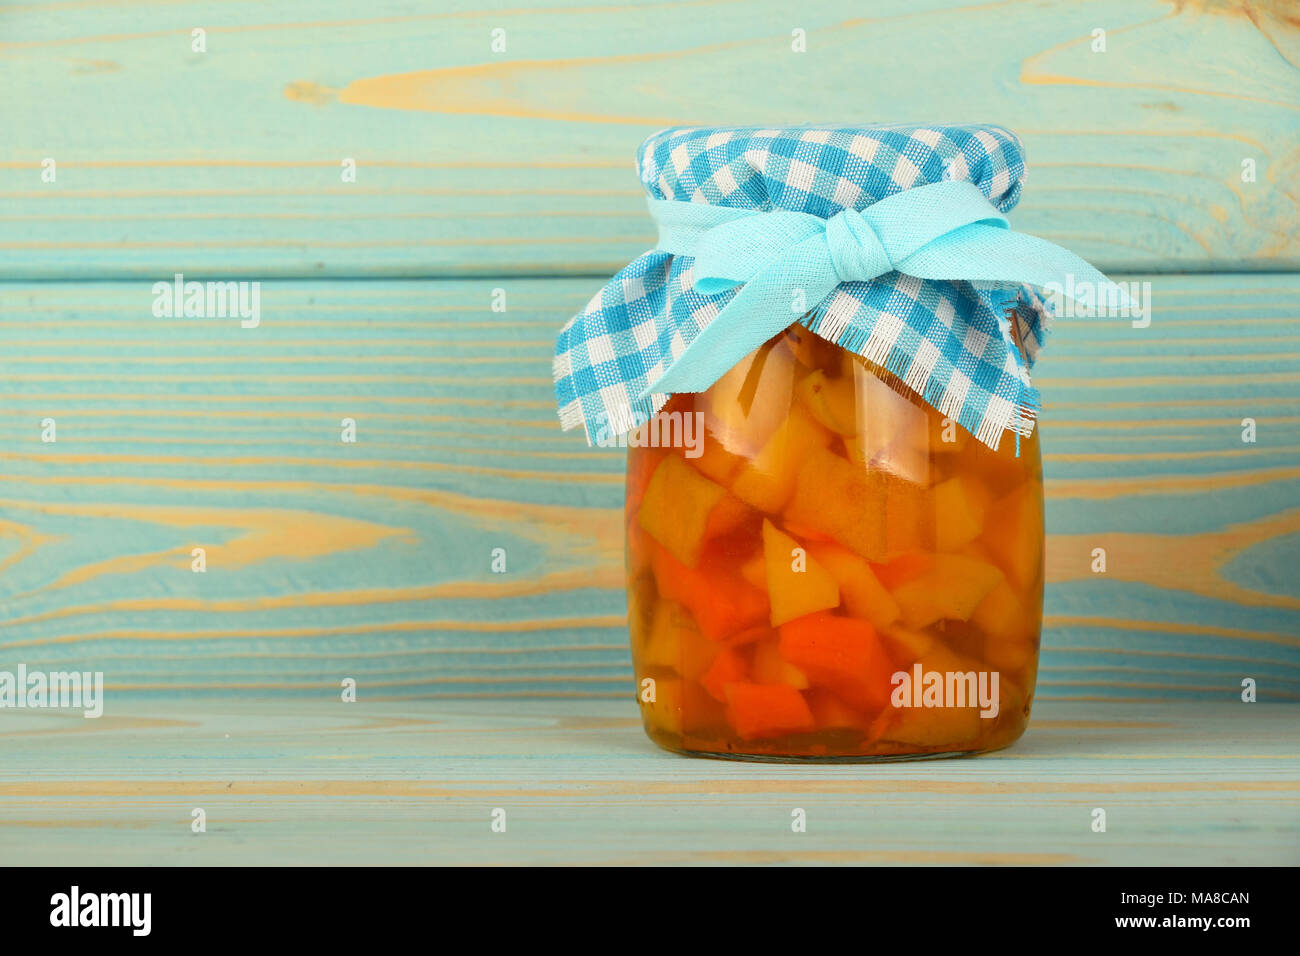 Close Up Of One Glass Jar Of Homemade Quince Jam With